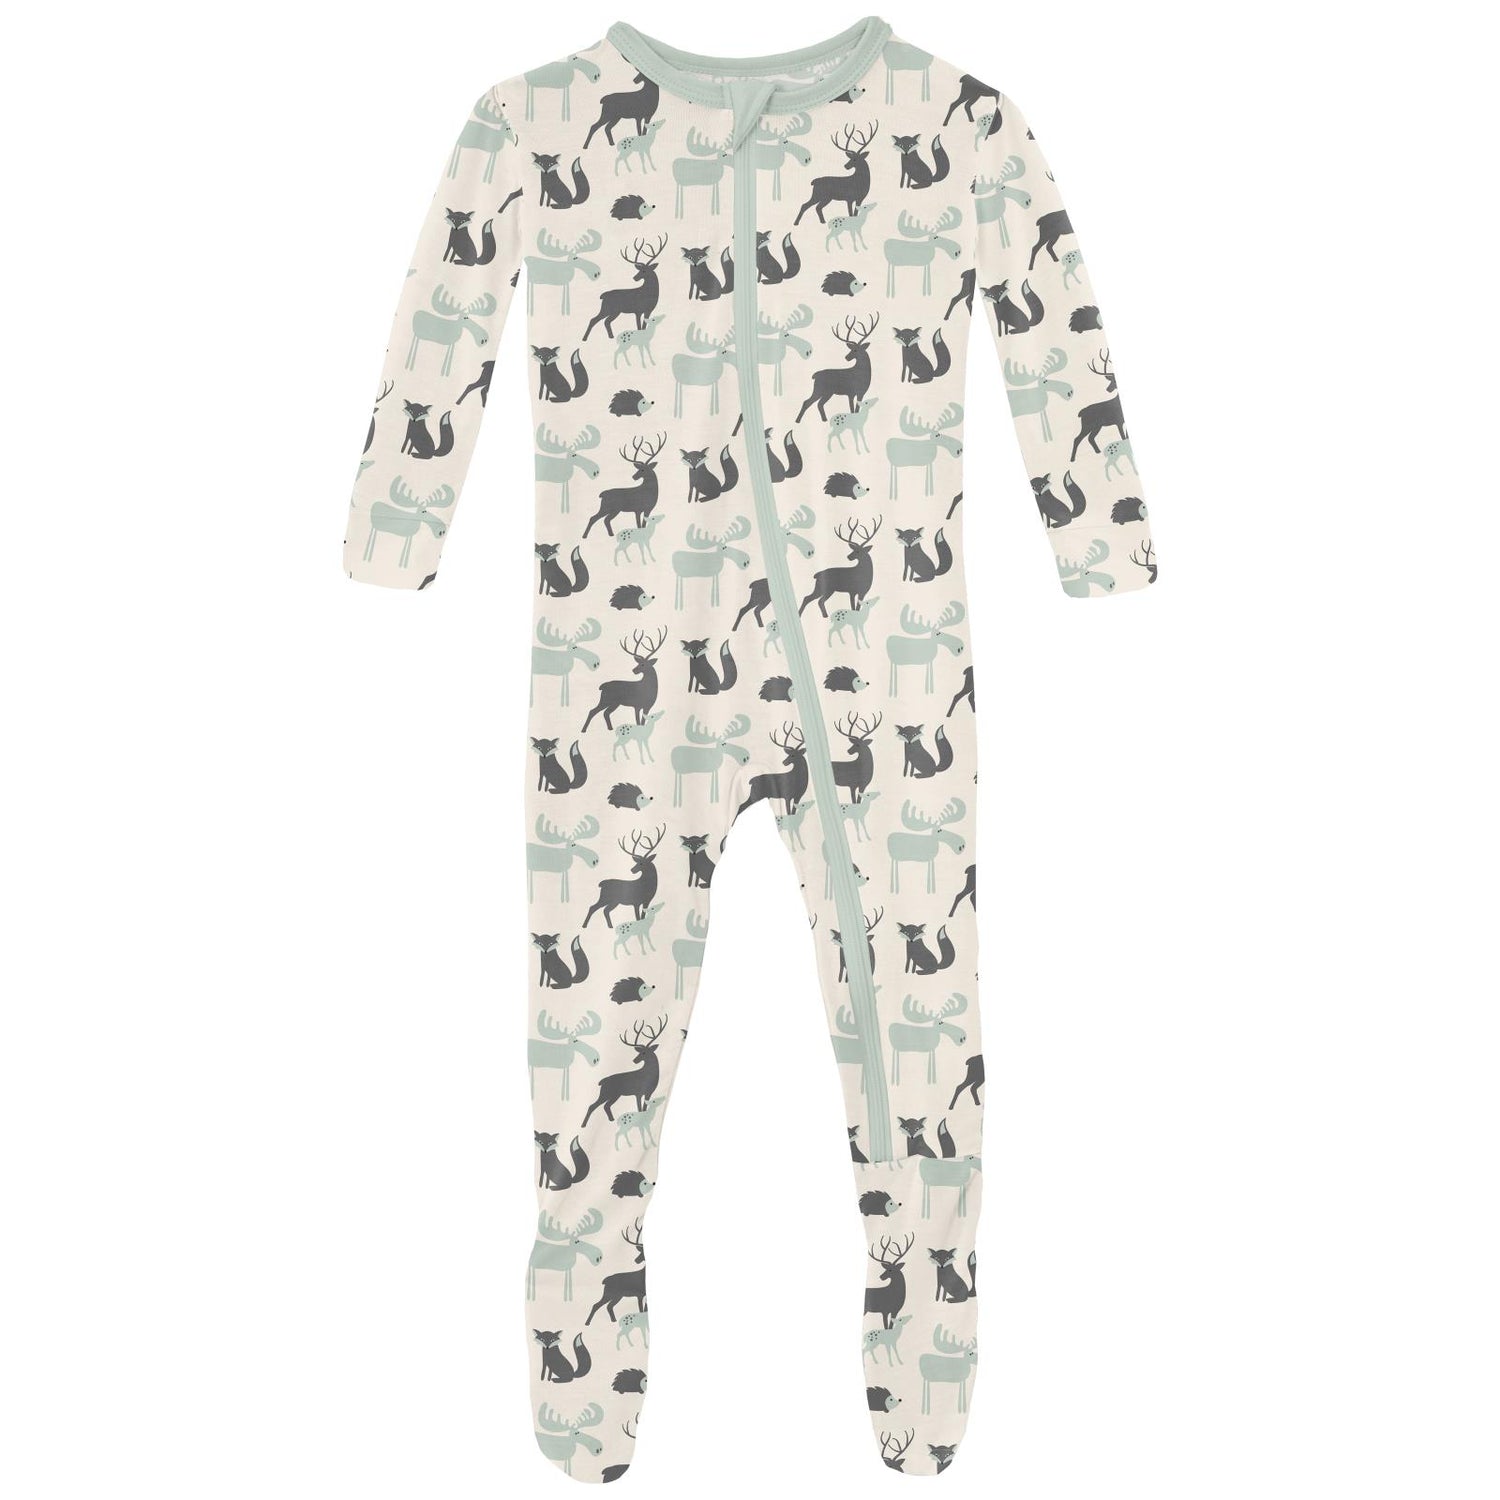 Print Footie with Zipper in Natural Forest Animals